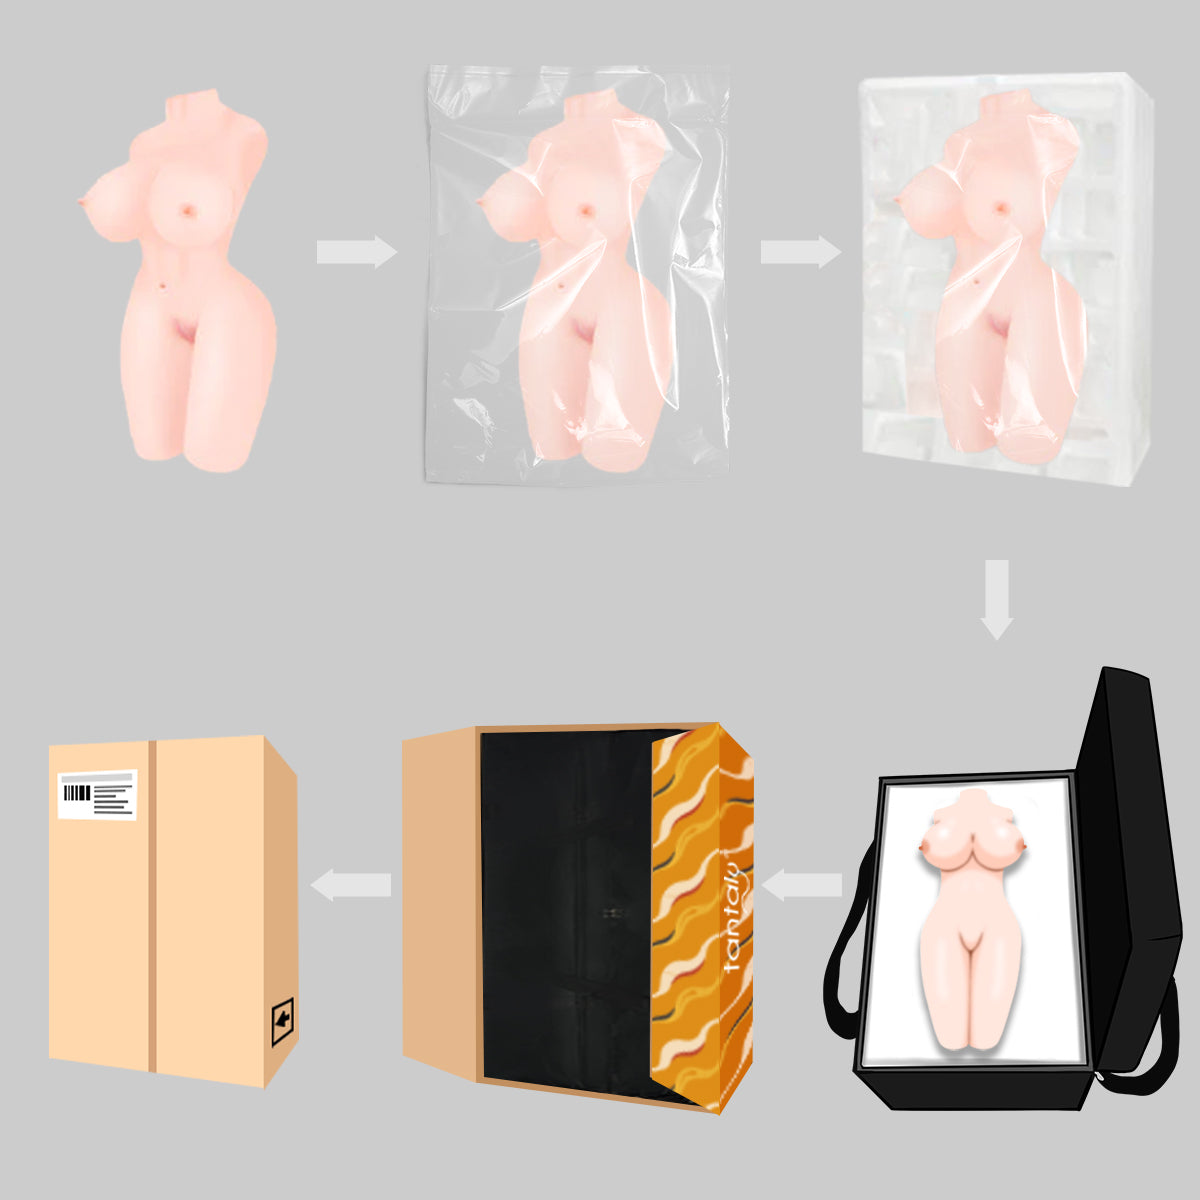 tantaly sex doll torso packaging flow chart monica.jpg__PID:16c50093-e3ca-498c-bc7d-f3e3d9d6f008